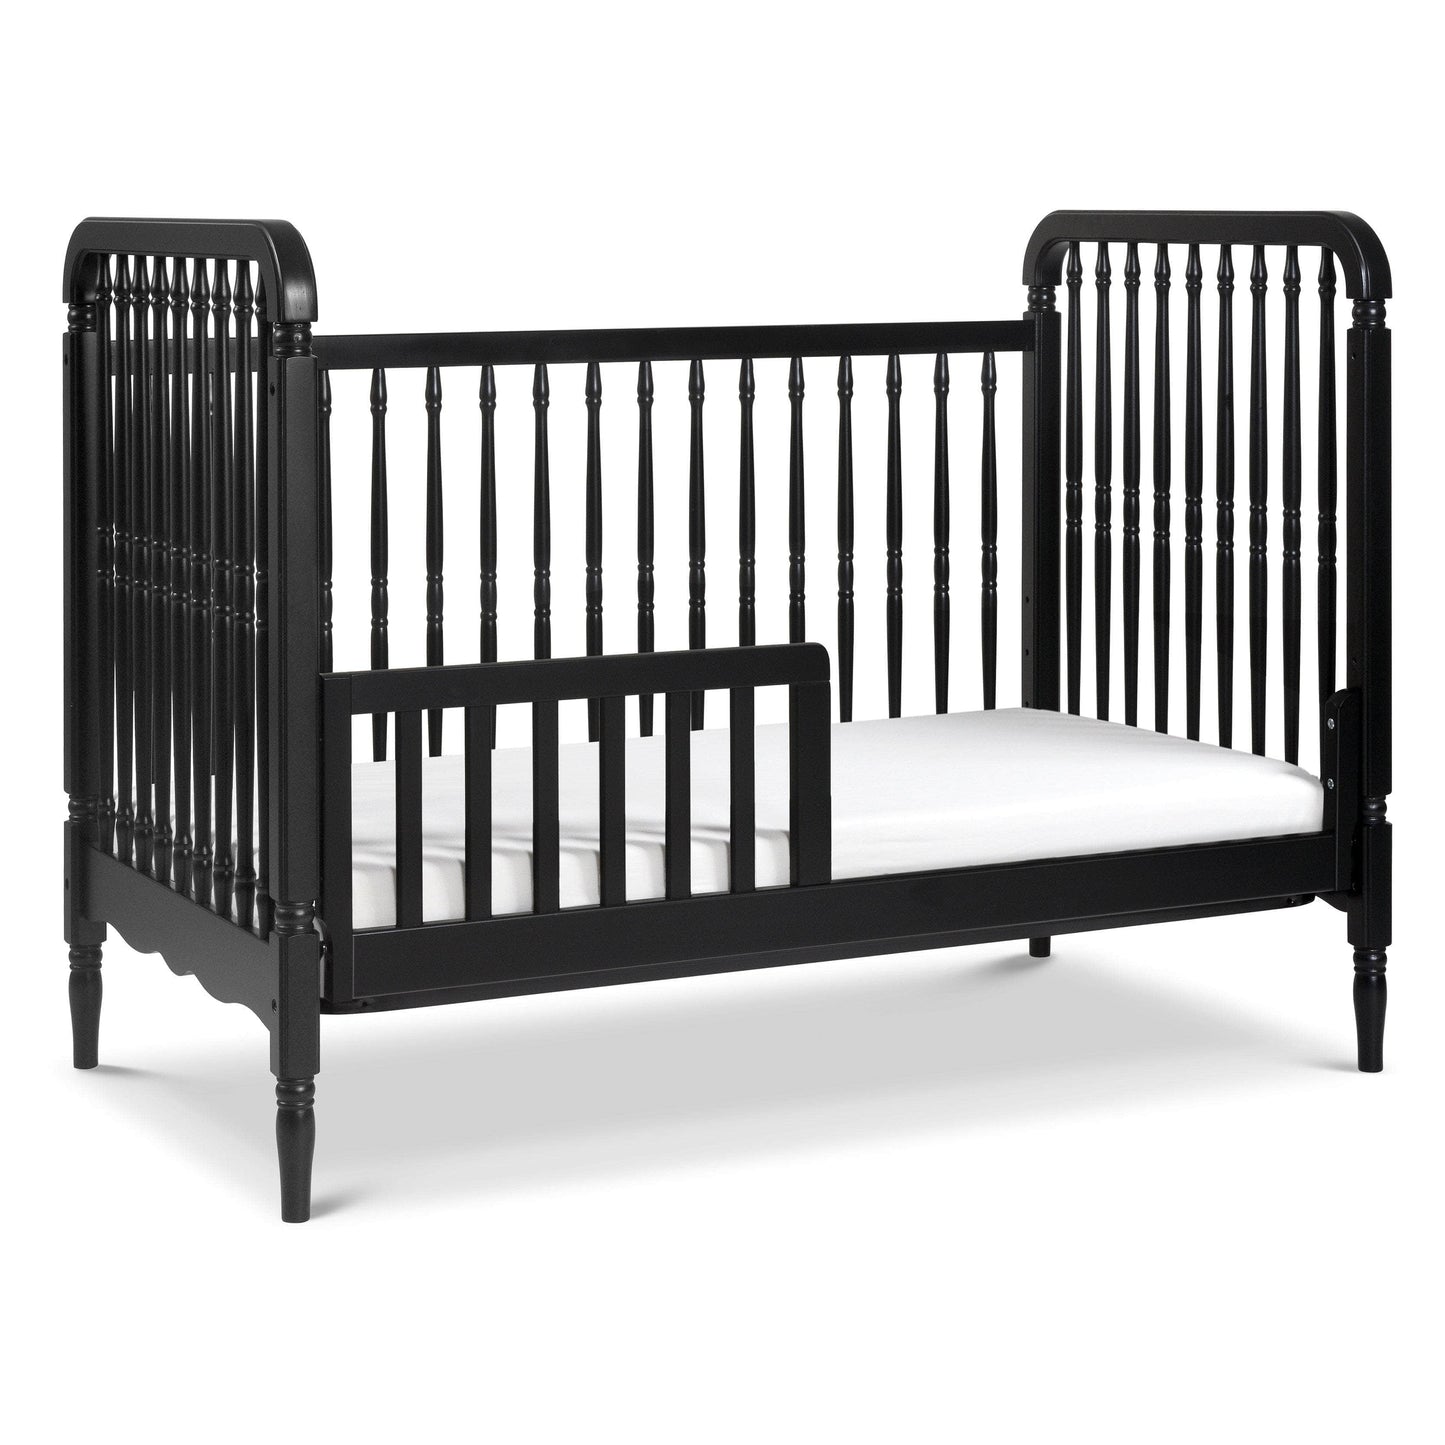 M7101B,Liberty 3-in-1 Convertible Spindle Crib w/Toddler Bed Conversion Kit in Black